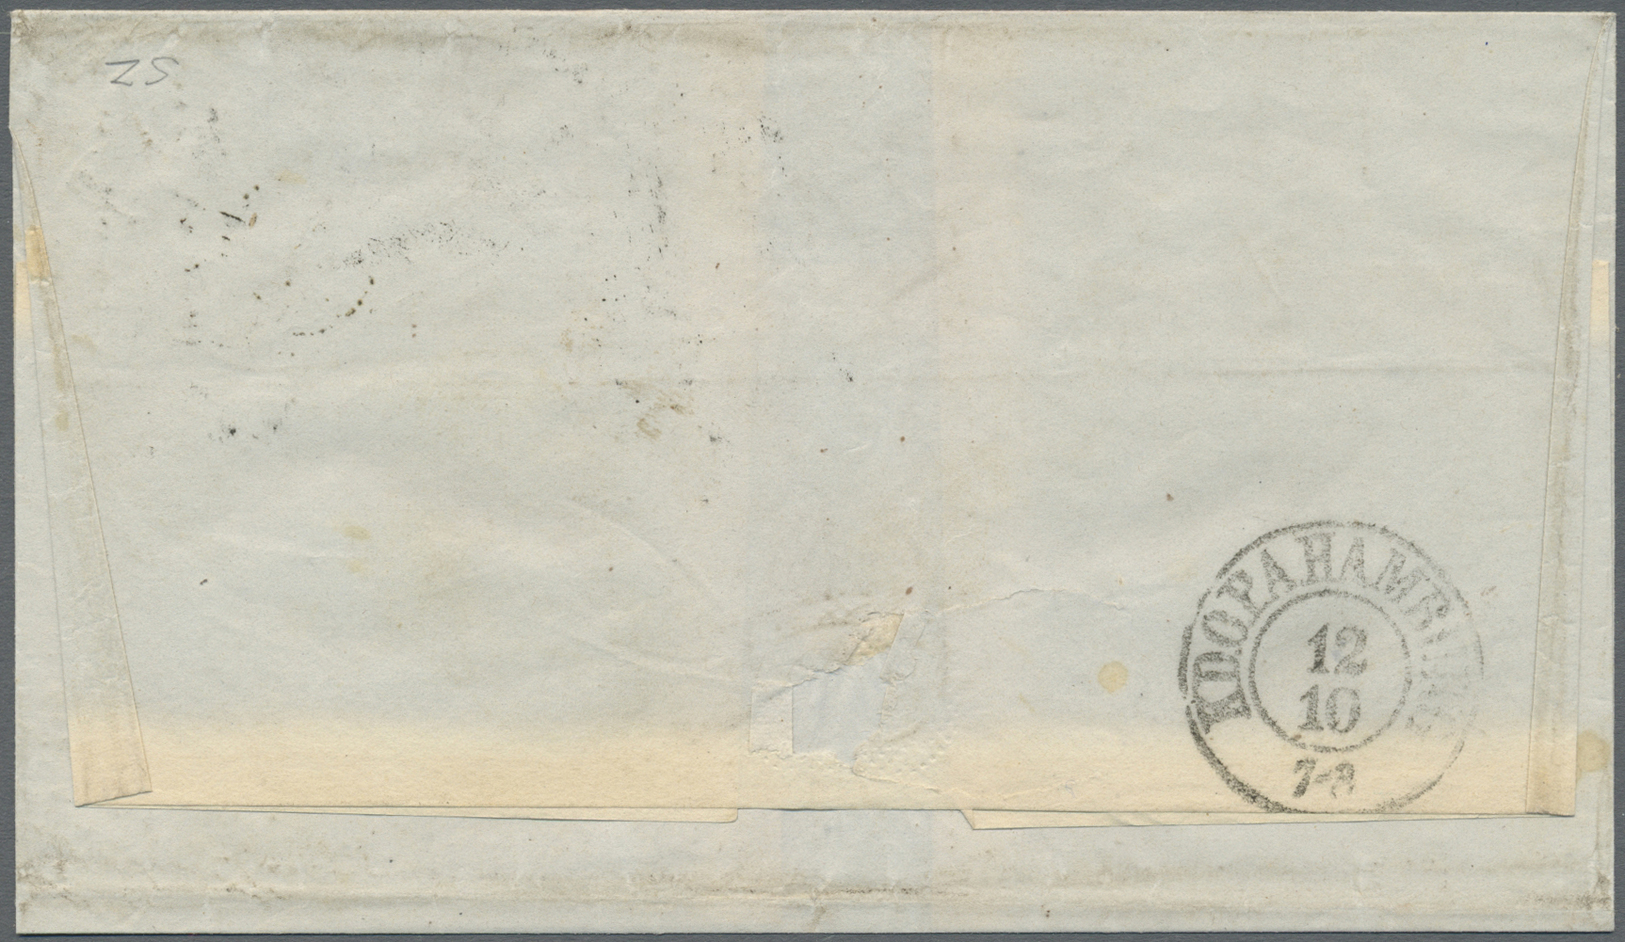 Br Dänemark: 1855, 4s. Reddish Brown, Fresh Colur, Touched To Full Margins, On Ship Letter "p. Vicken", Oblit. Up - Covers & Documents